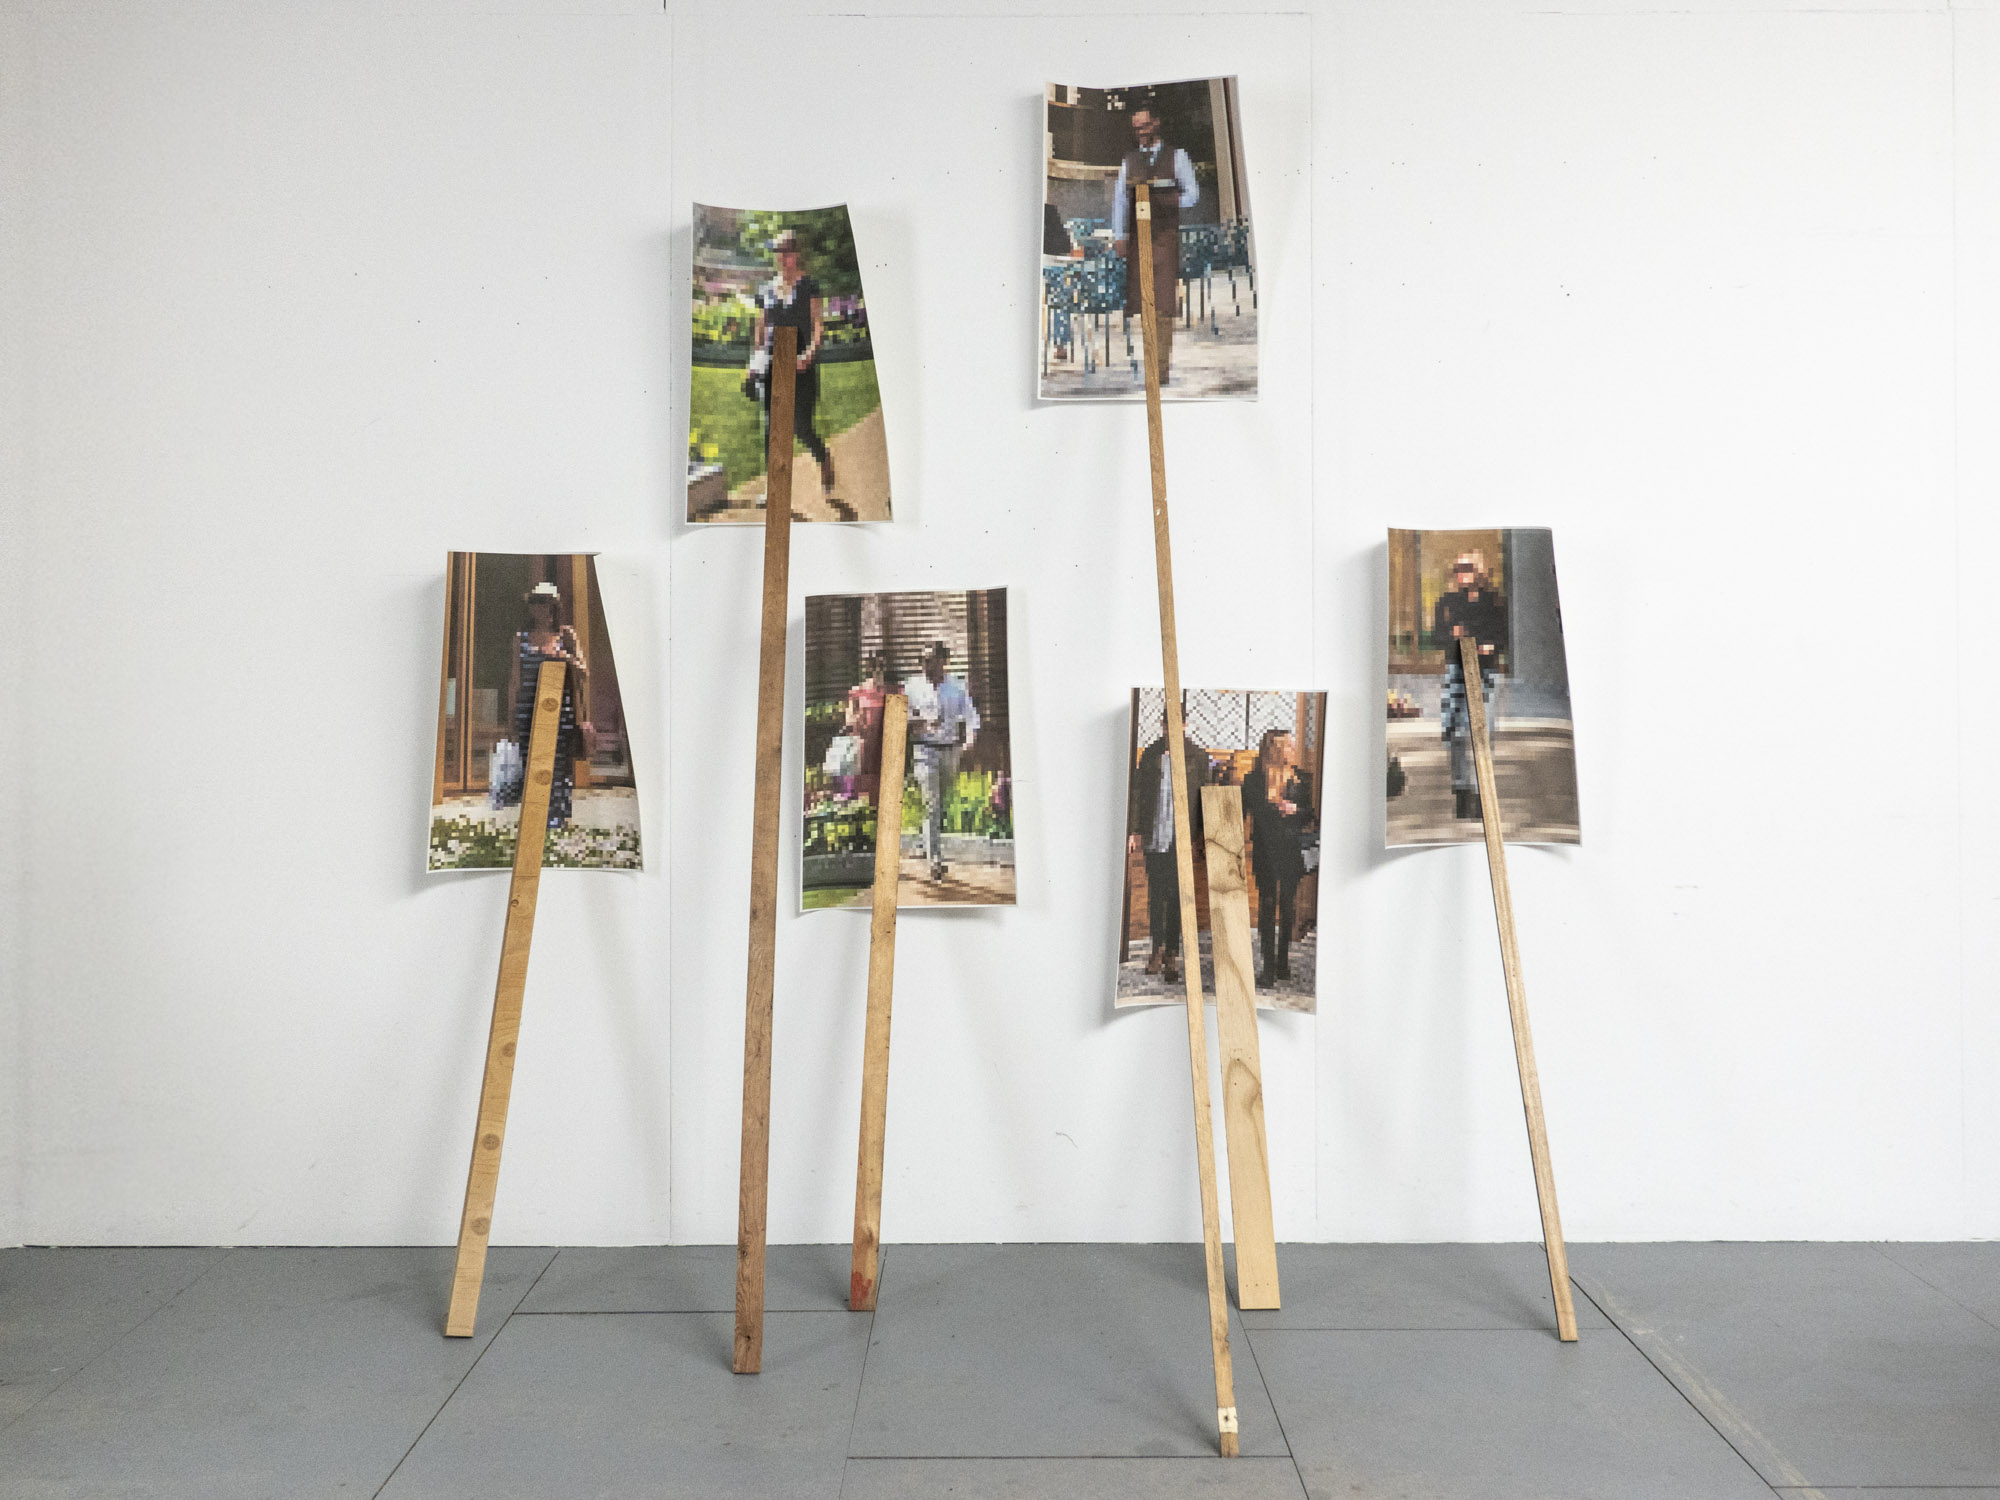 six images of people walking are held against a white wall by old pieces of wood